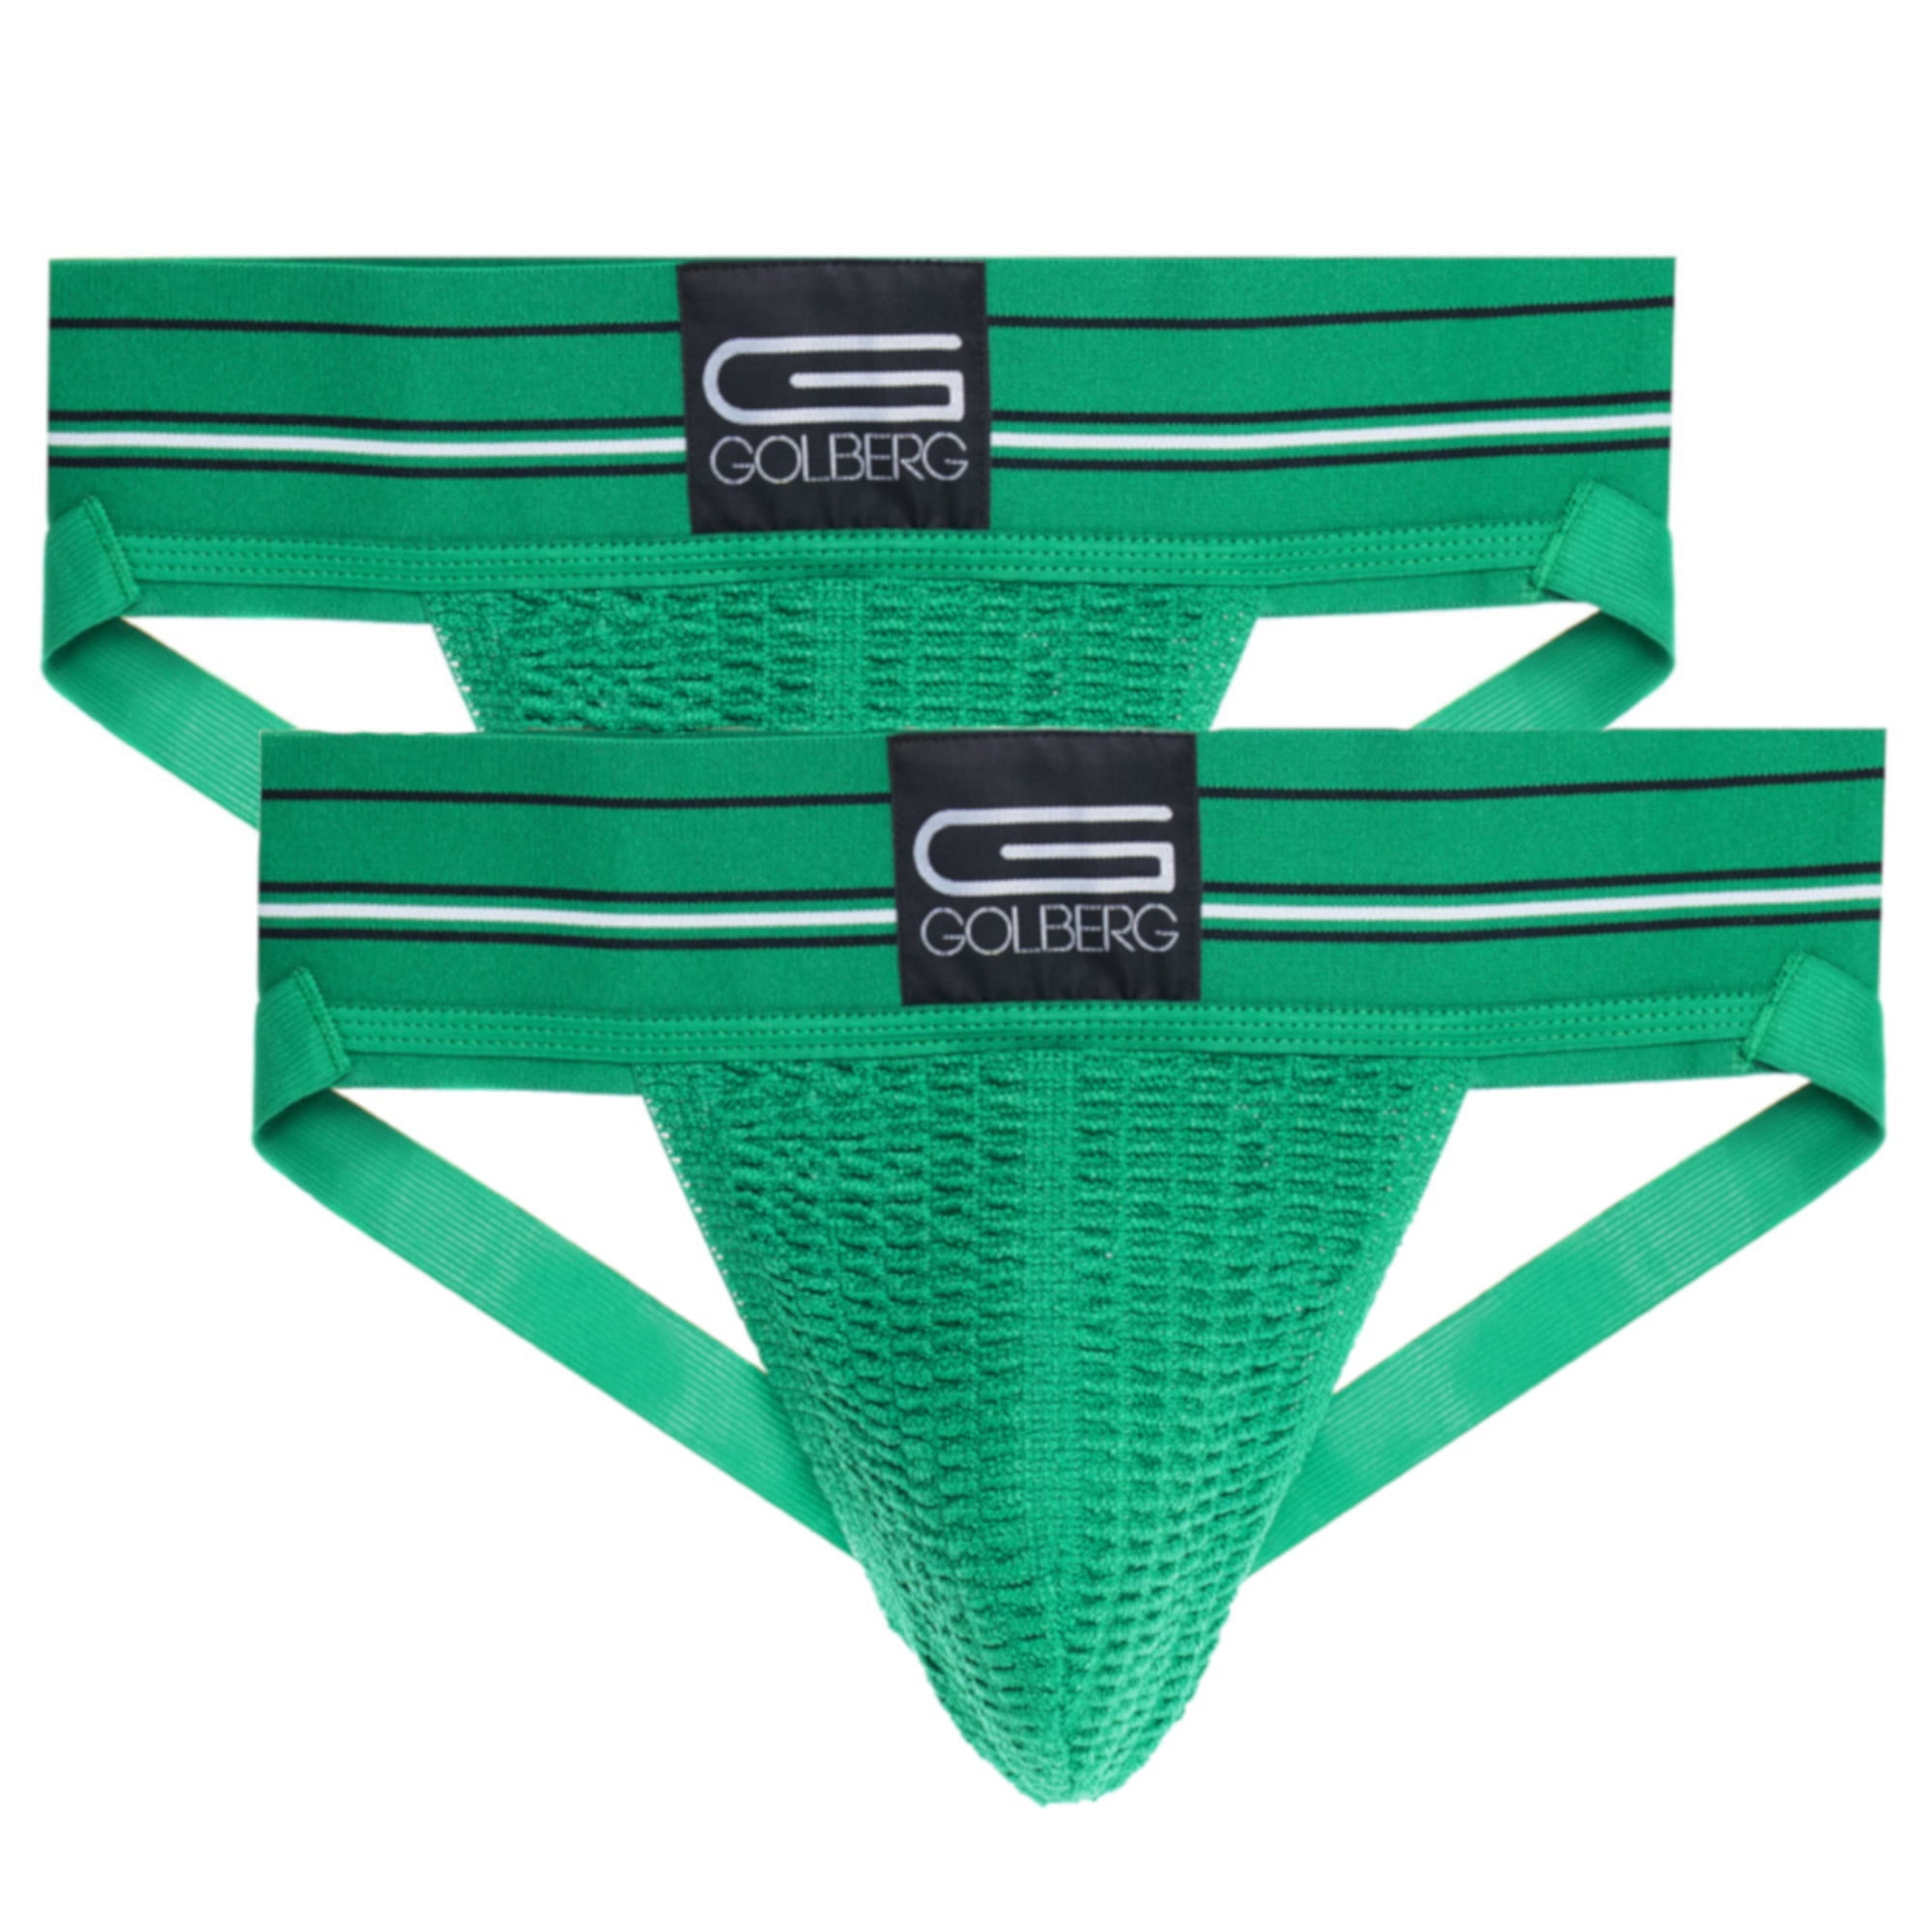 GOLBERG Athletic Supporter 2 Pack 